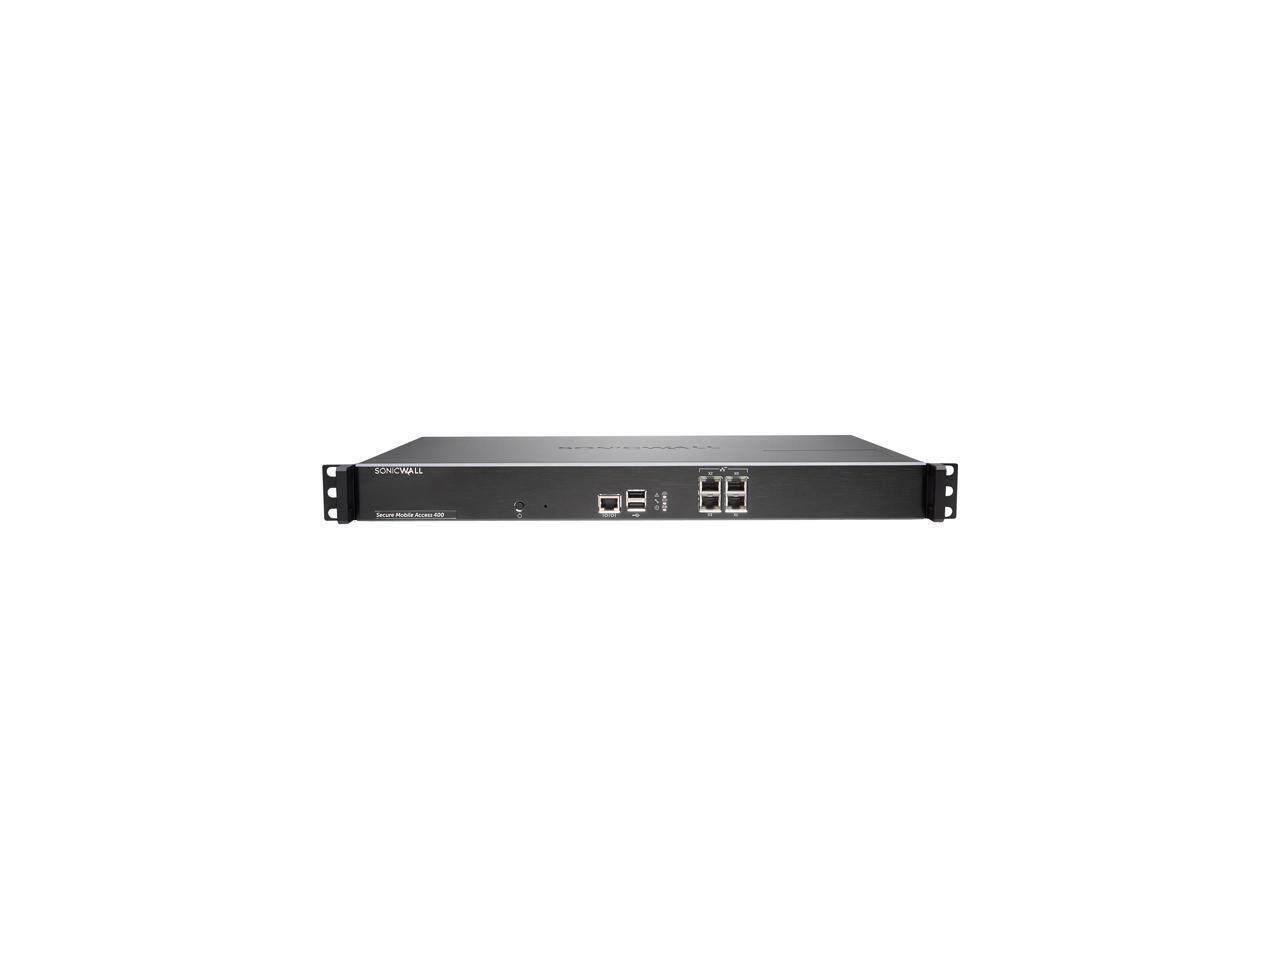 SonicWall 02-SSC-2801 SMA 410 with 25 User License